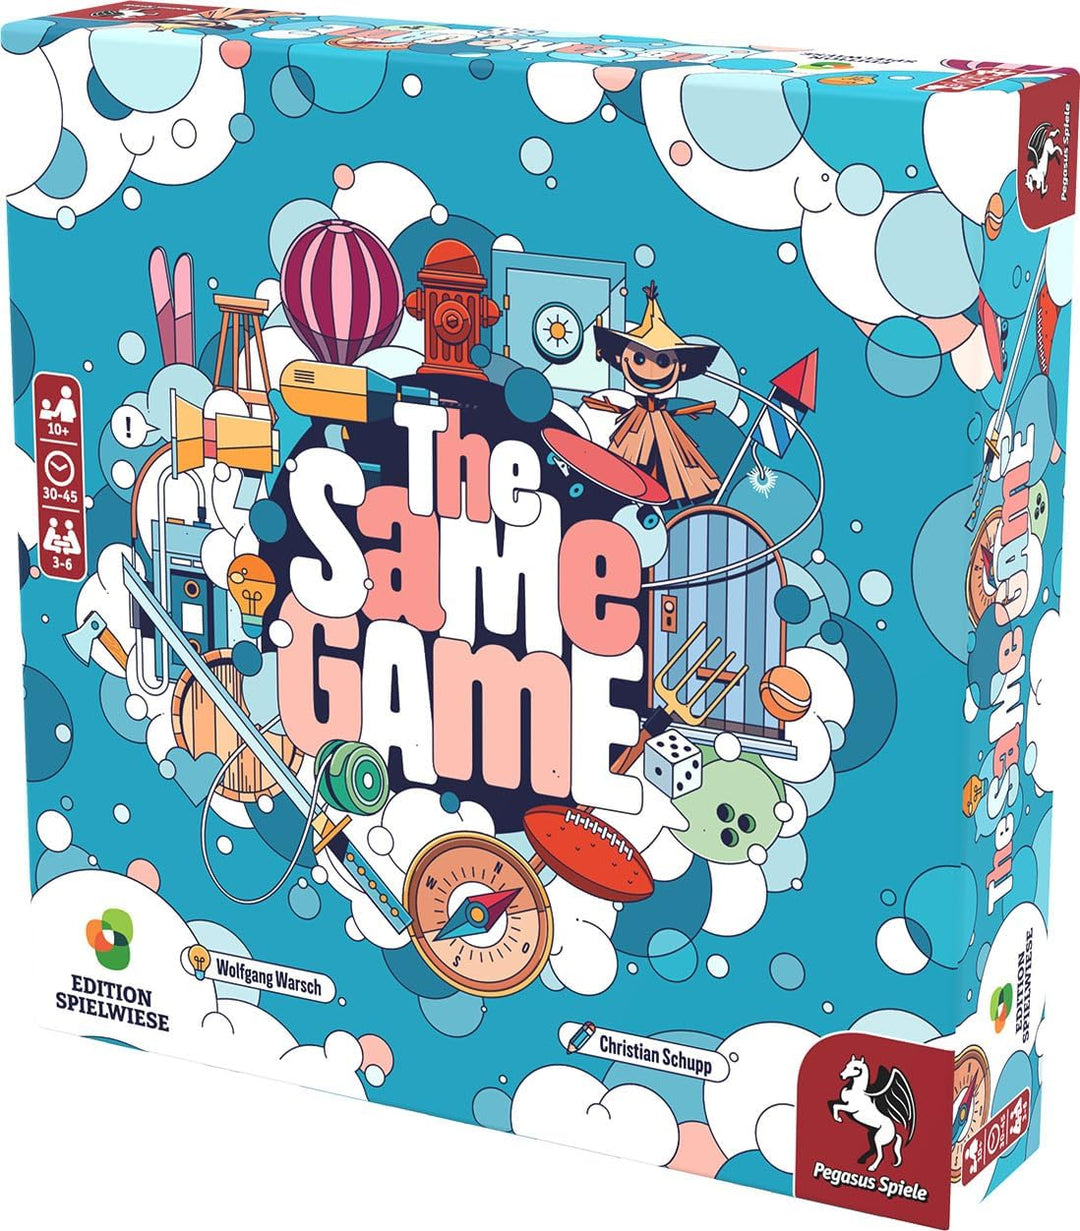 The Same Game (Edition Spielwiese) (English Edition) Board Game